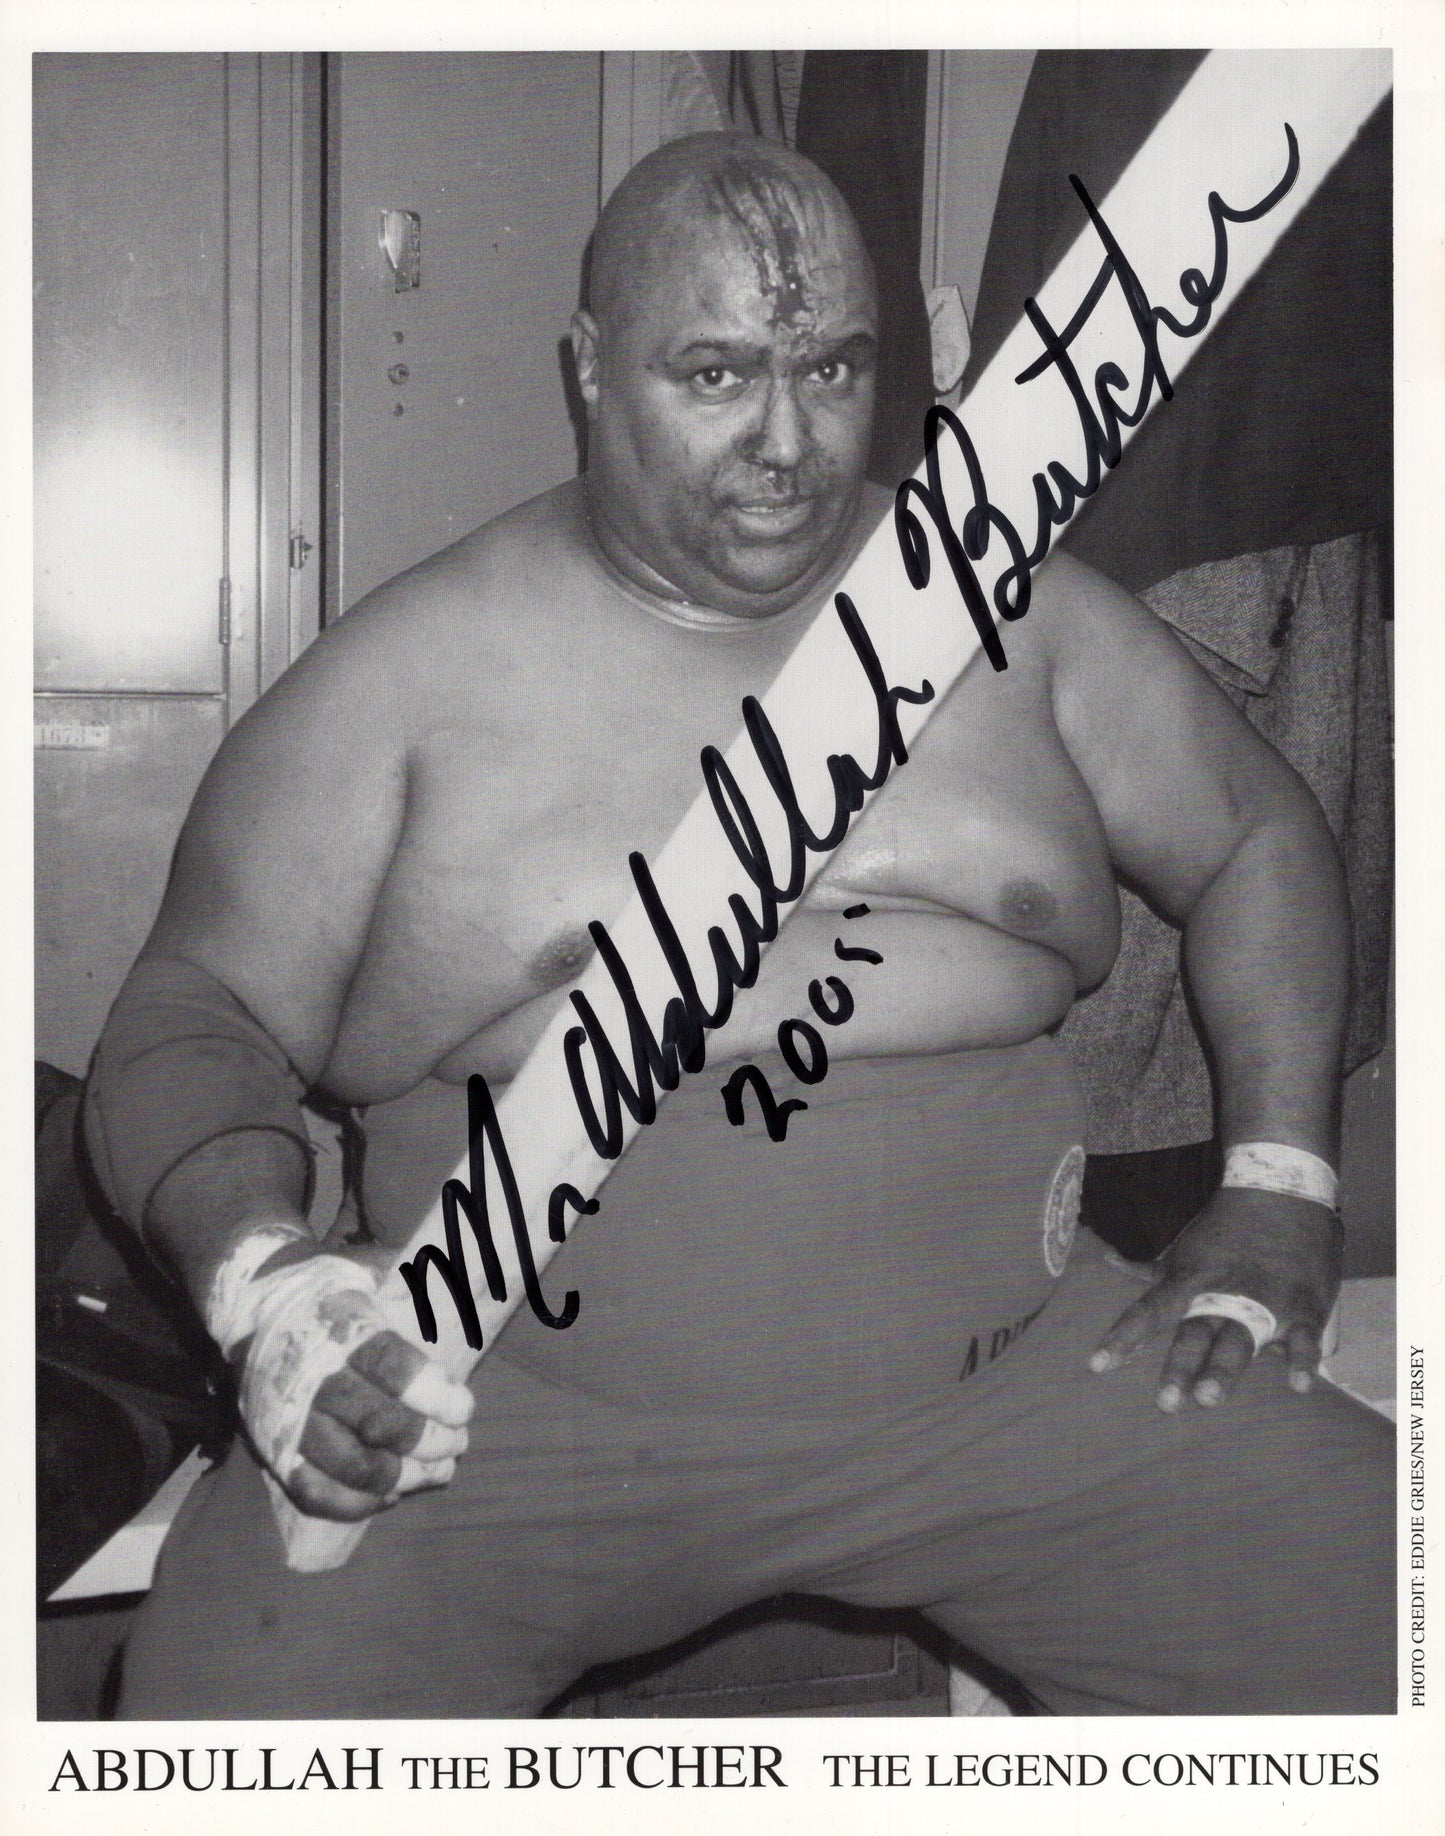 Abdullah The Butcher 8x10 NWA WCW photo signed auto autographed